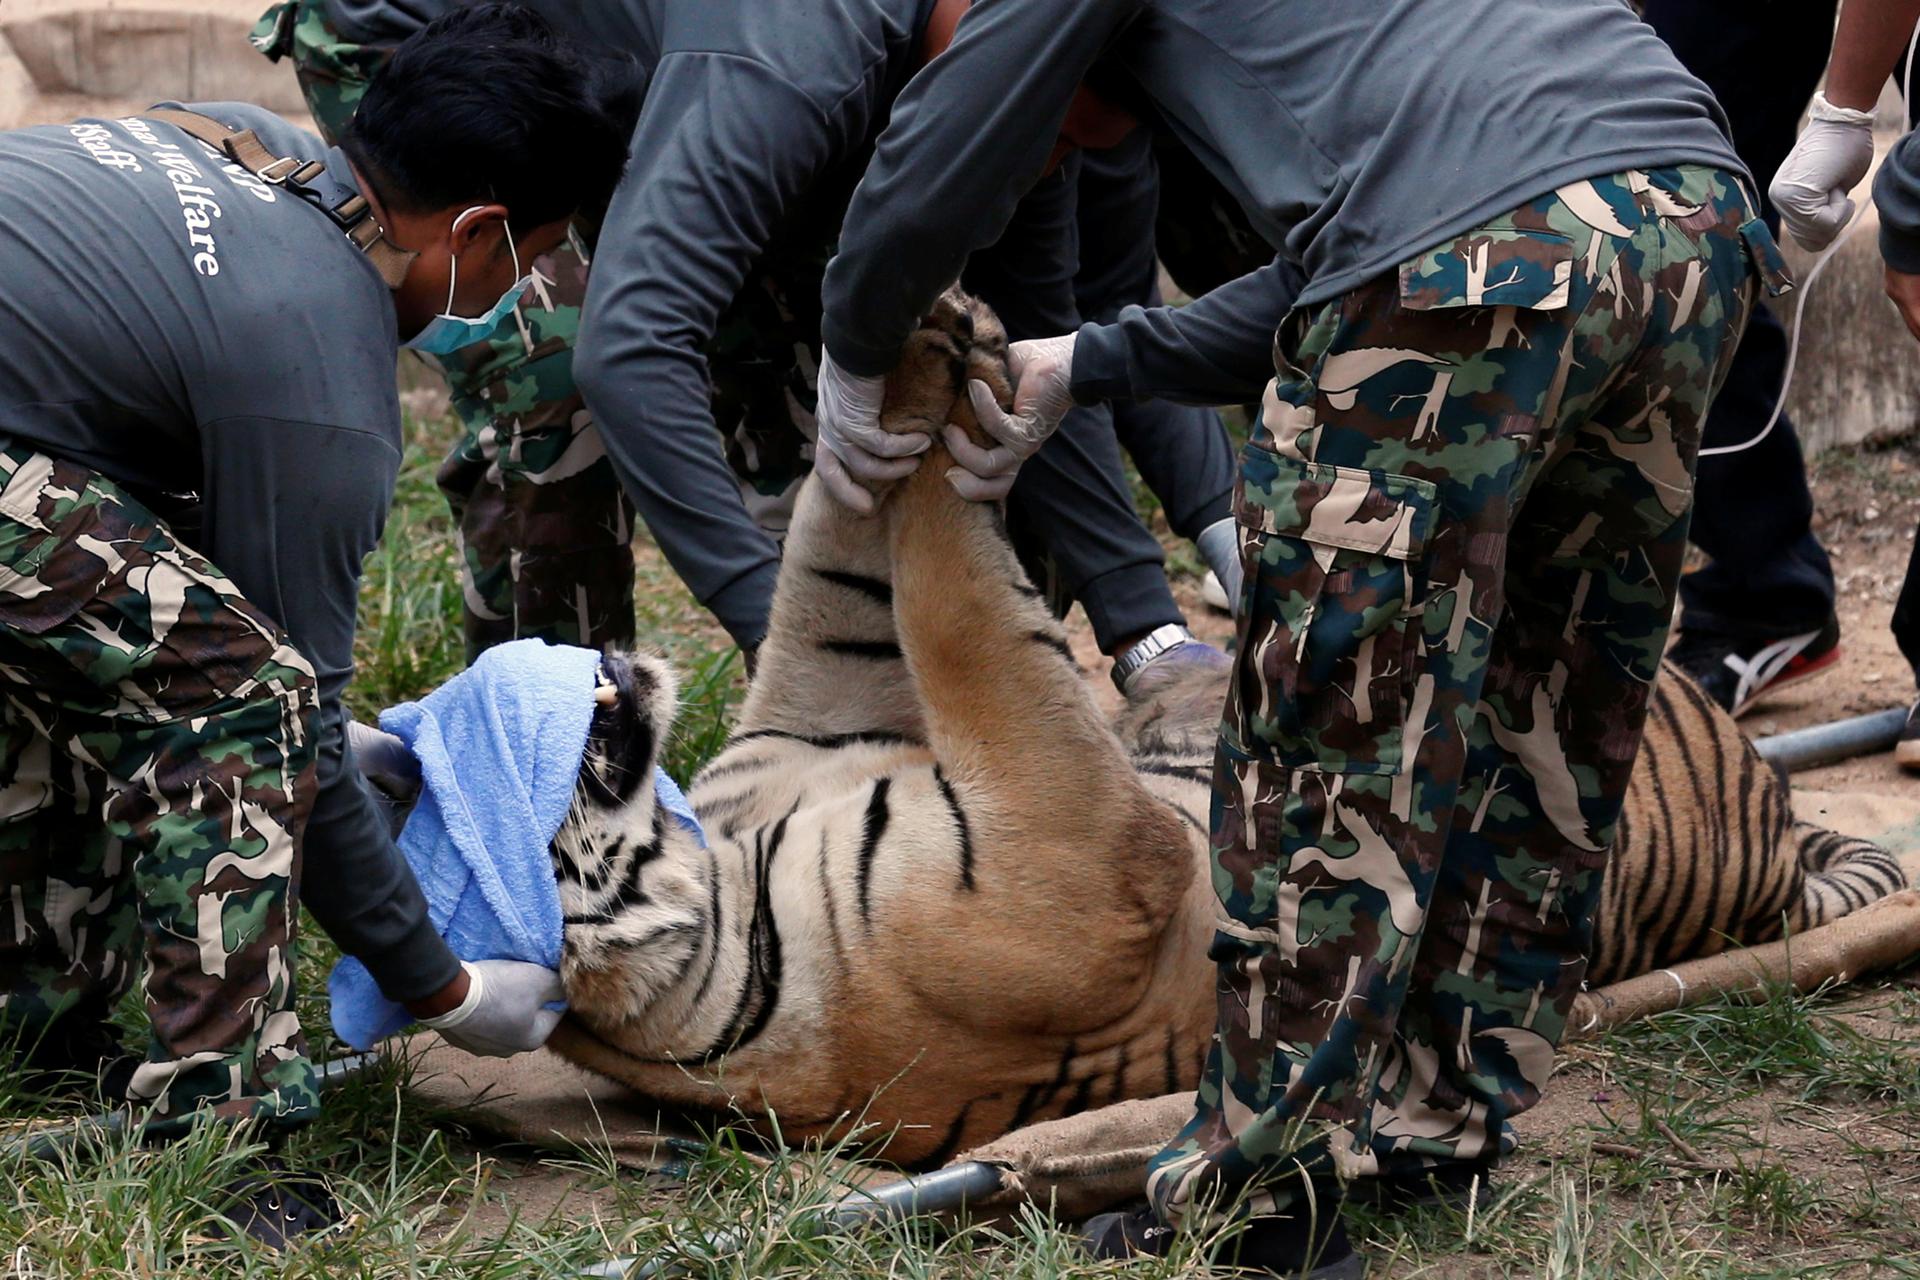 A sedated tiger is stretchered as officials start moving tigers from Thailand's controversial Tiger Temple, a popular tourist destination which has come under fire in recent years over the welfare of its big cats in Kanchanaburi province, west of Bangkok,